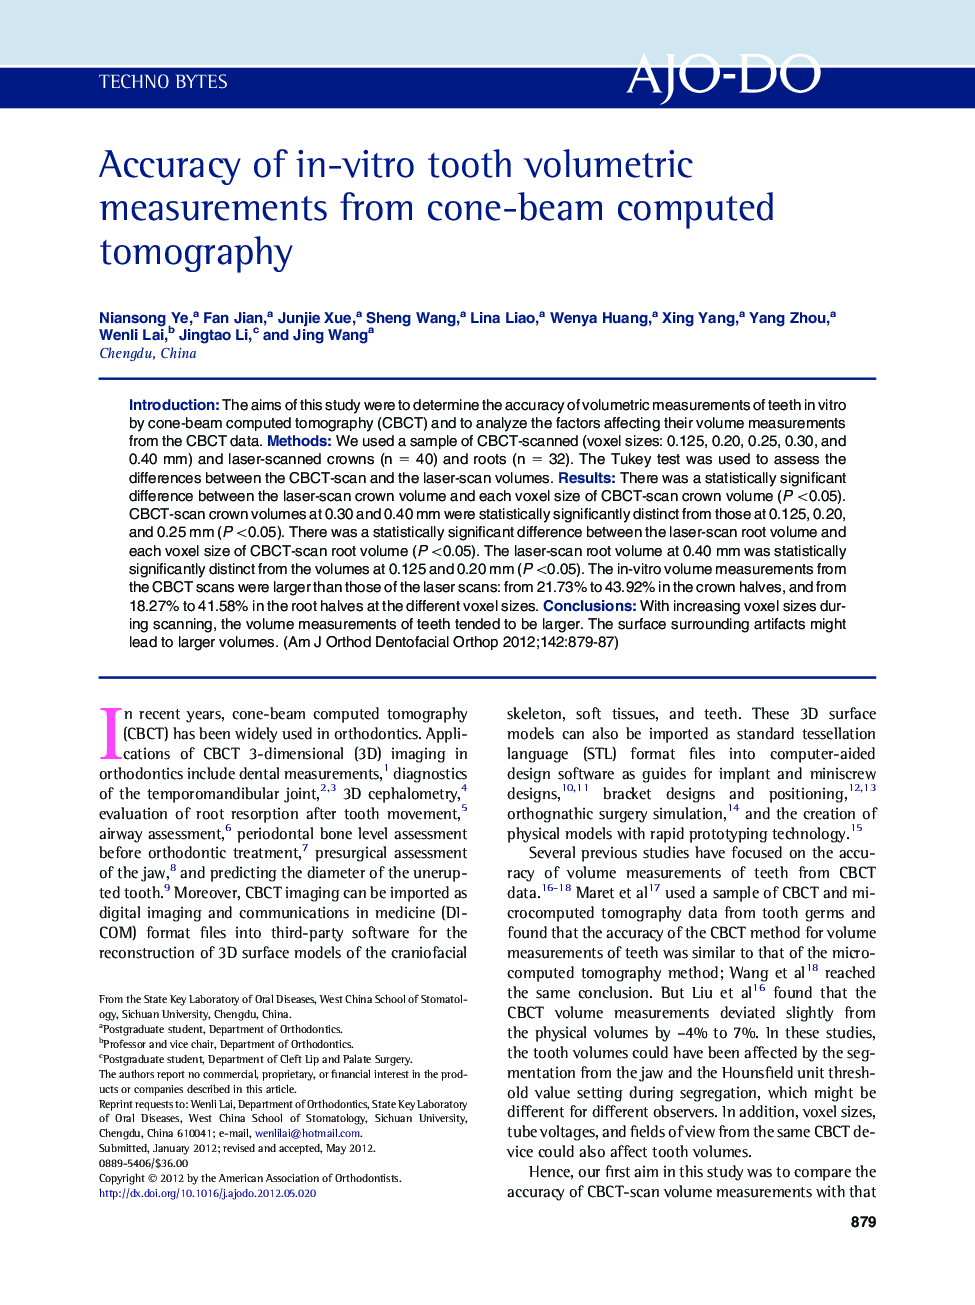 Accuracy of in-vitro tooth volumetric measurements from cone-beam computed tomography